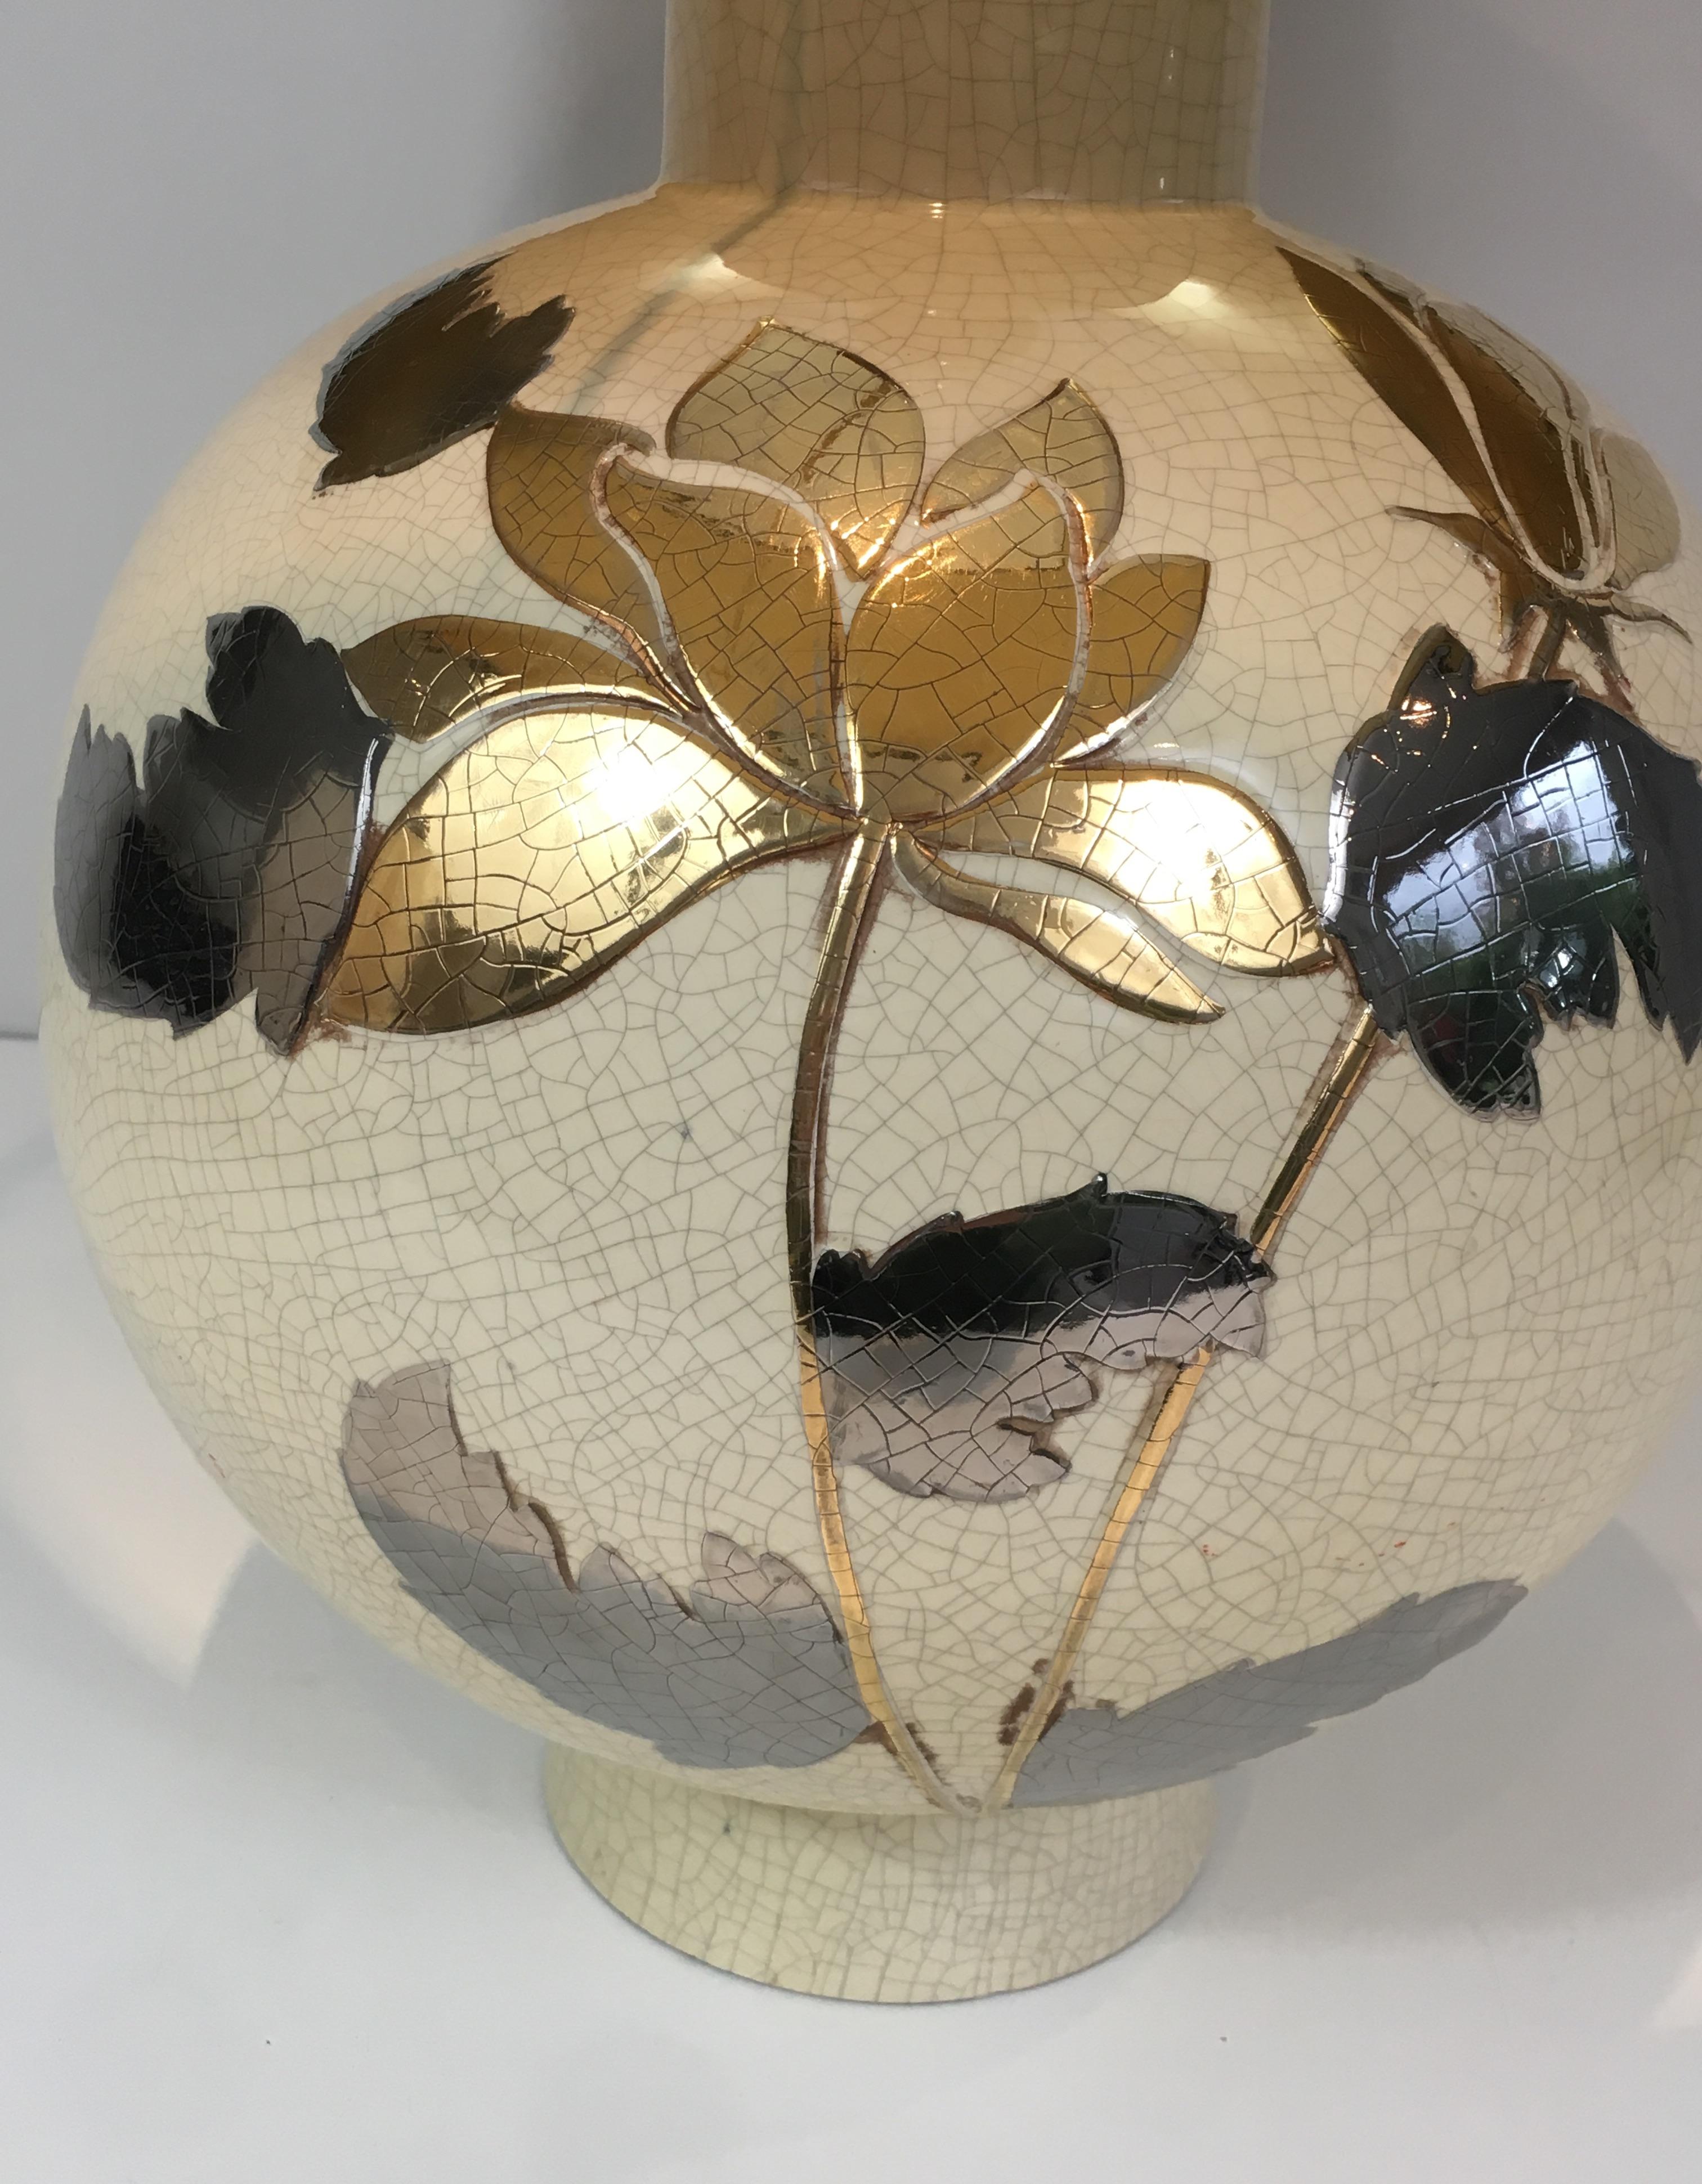 By L Drummer, Cracked Ceramic Lamp with Silver and Gold Flower Decoration on the 2